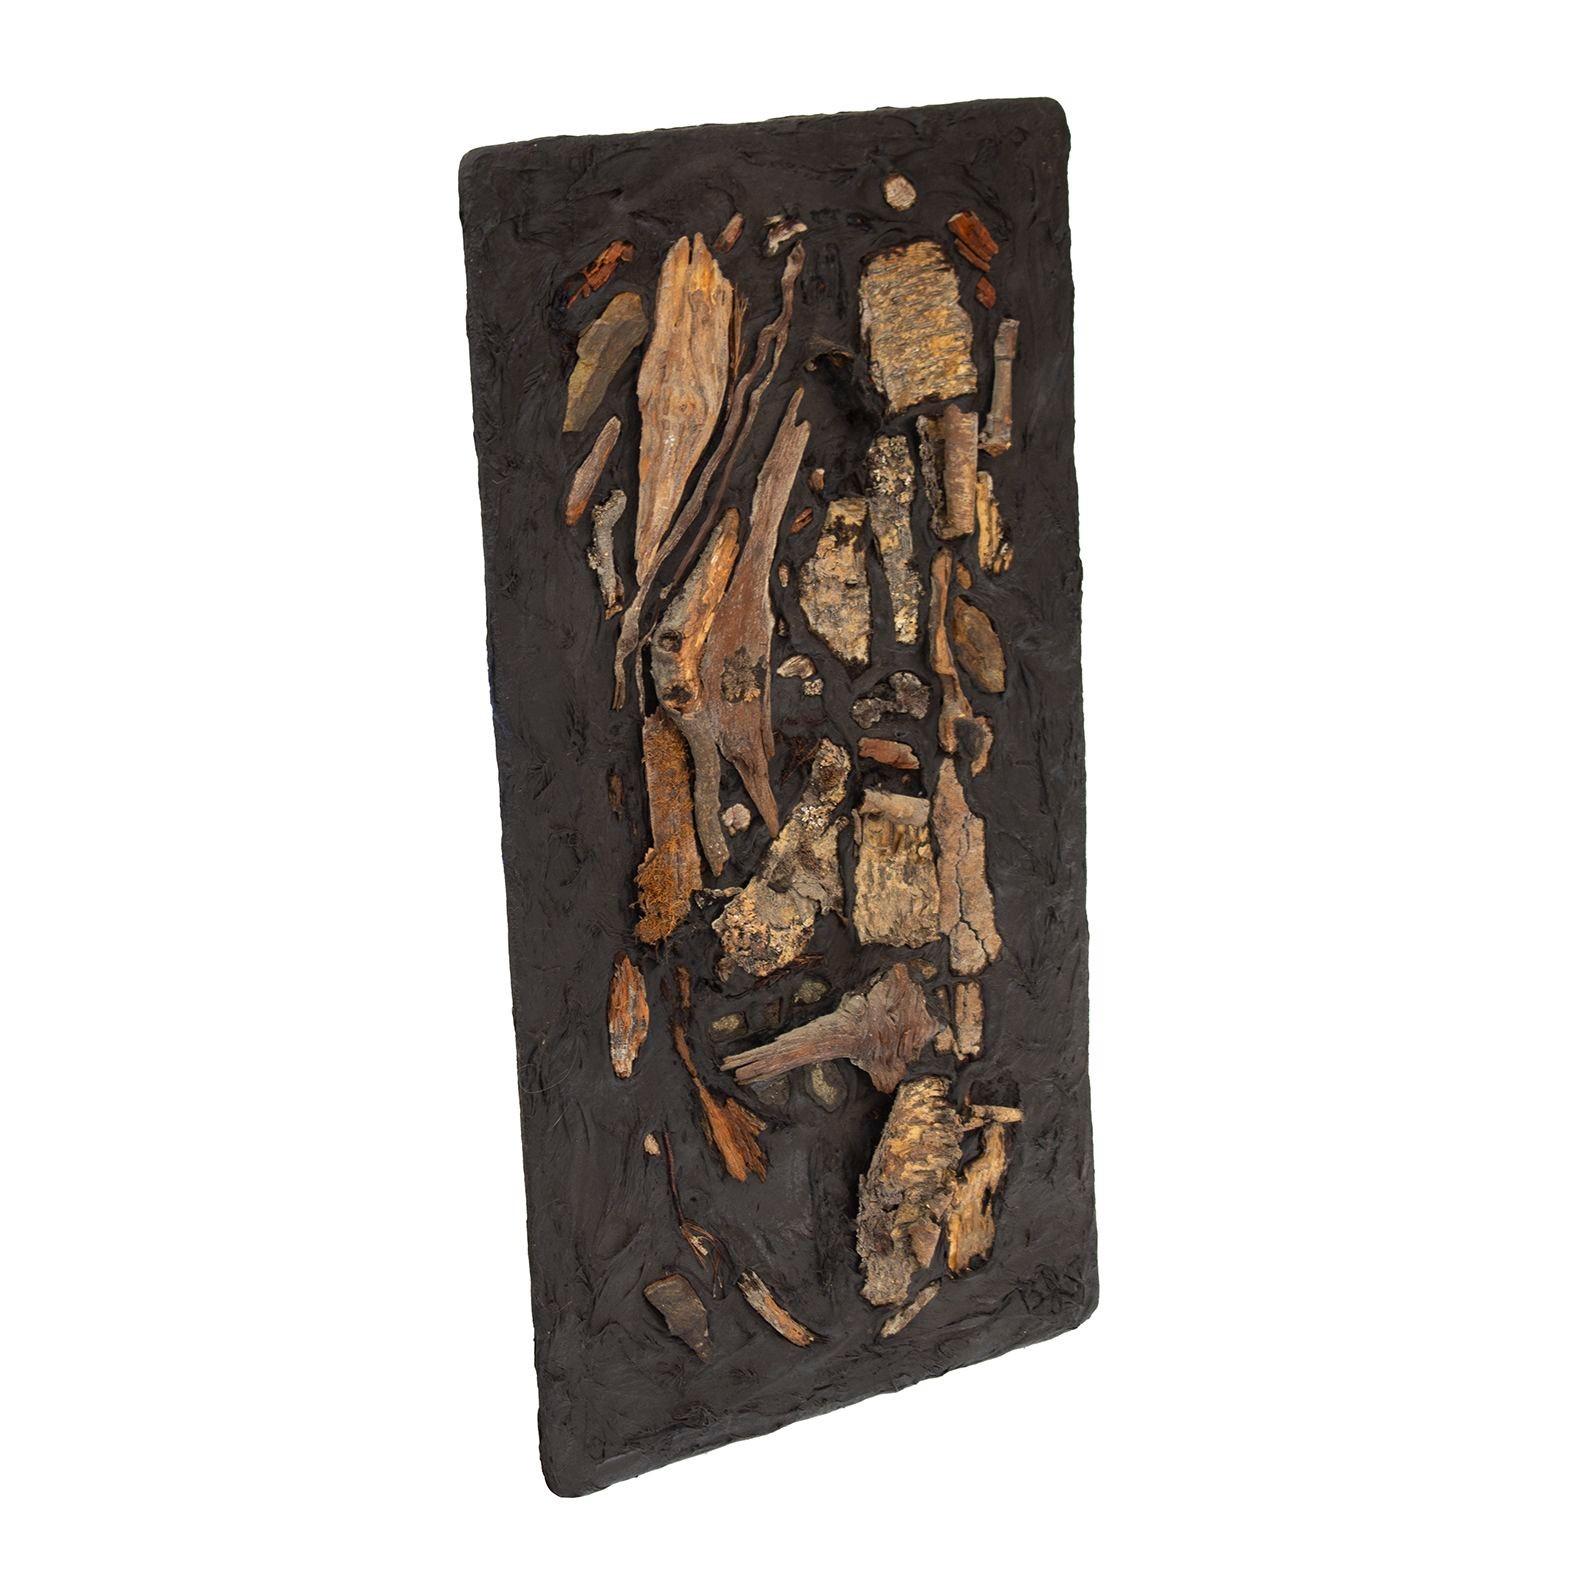 USA, 1970s
Artist-made driftwood bas relief on board. Various pieces of found driftwood form an interesting composition. Purchased from the estate of the artist on Lake Michigan. Great detail to this piece, plainly composed of pieces found while